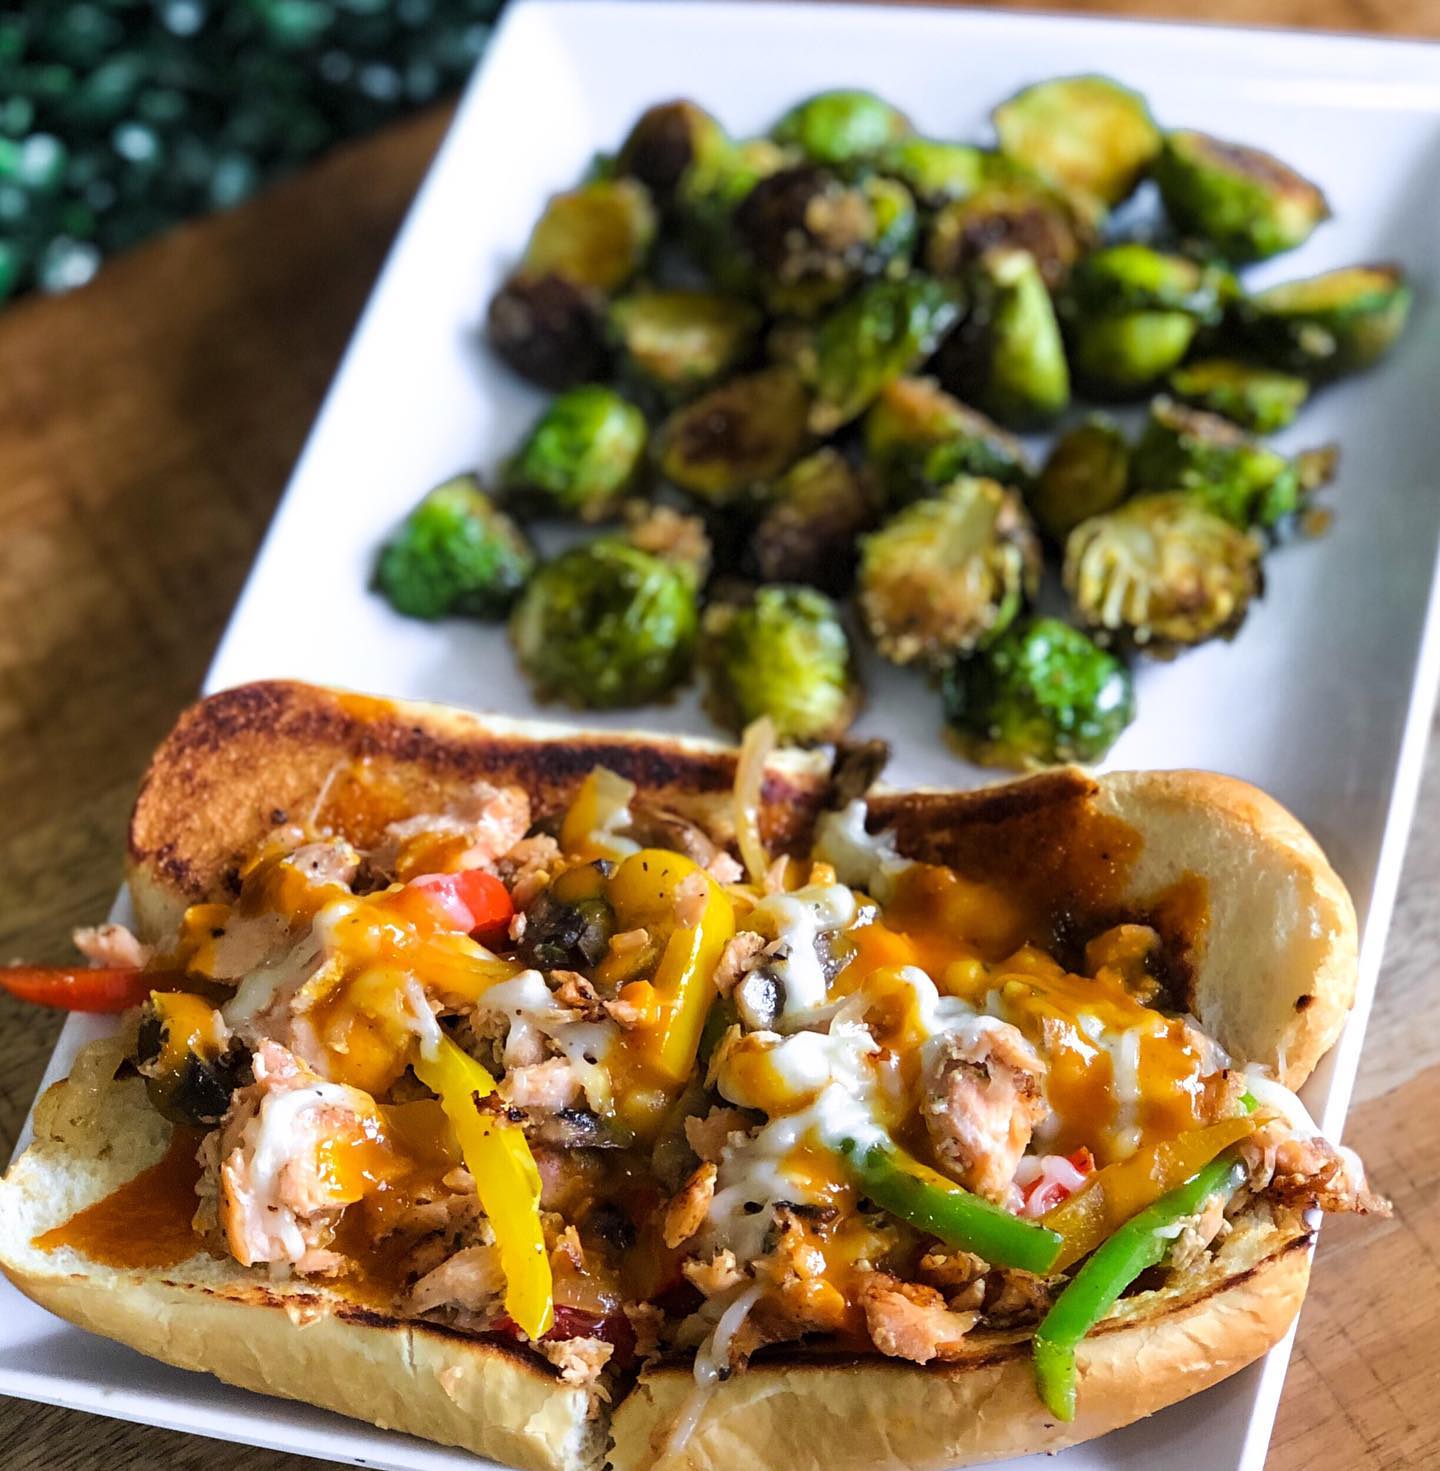 A white rectangular plate with a sandwich stuffed with grilled salmon, grilled trinity pepper mix, mushrooms, onions, and melted vegan mozzarella on brioche bread next to a side of roasted Brussels sprouts